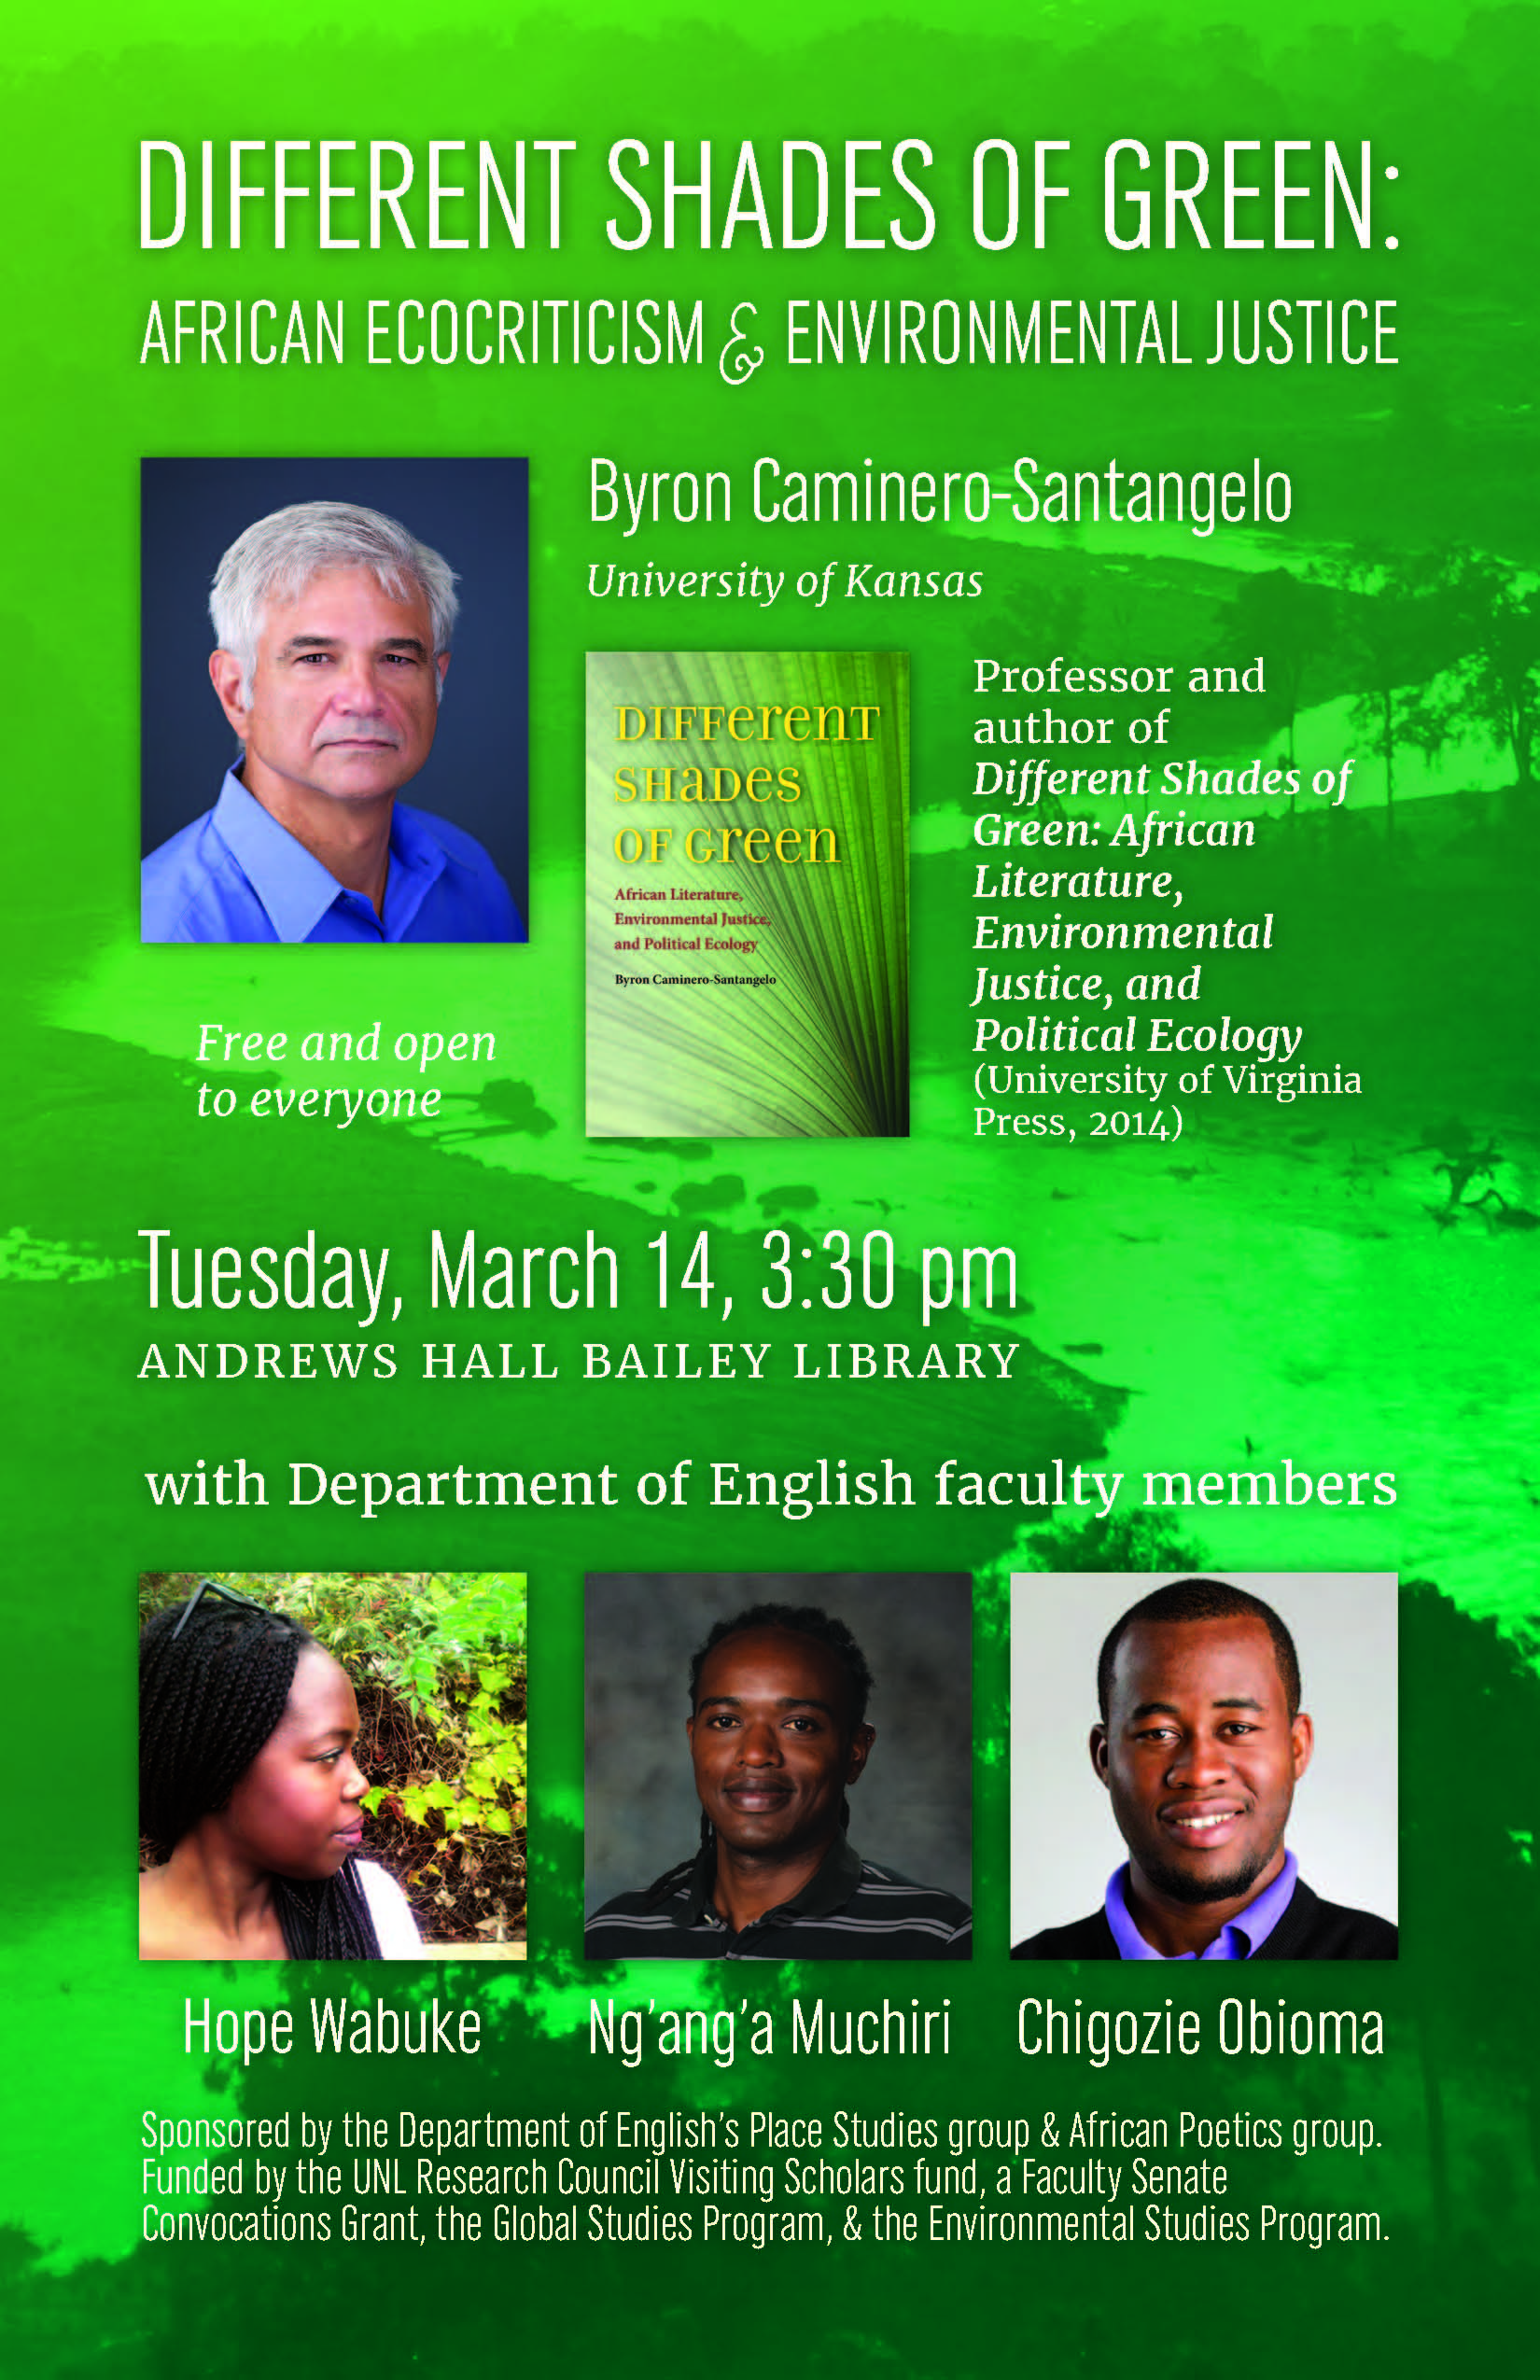 EVENT: Different Shades of Green: African Ecocriticism and Environmental Justice